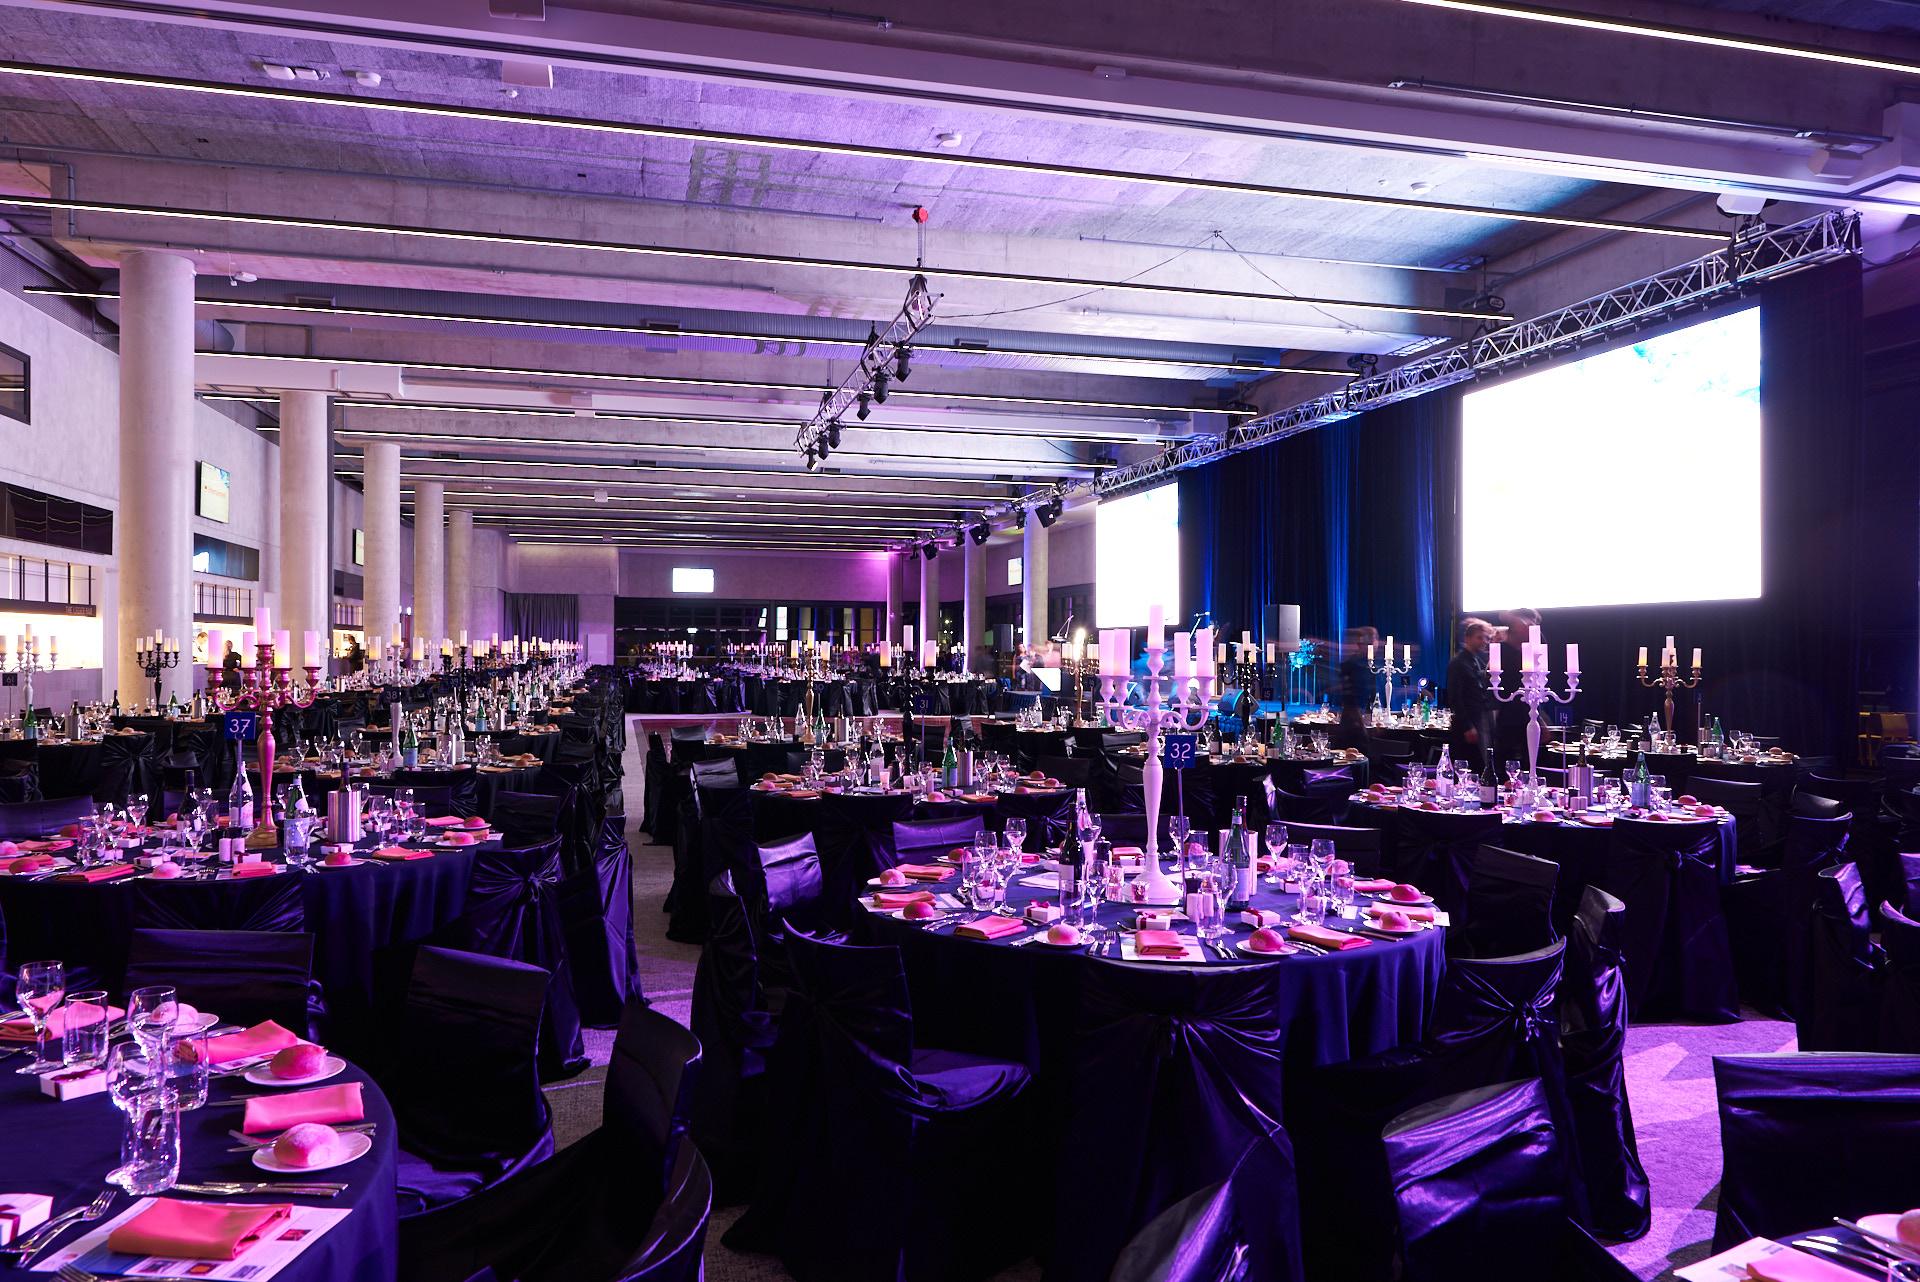 Large Event Photography Supplier. Wide Photo of Royal Randwick Racecourse Event Room. Photos by orlandosydney.com